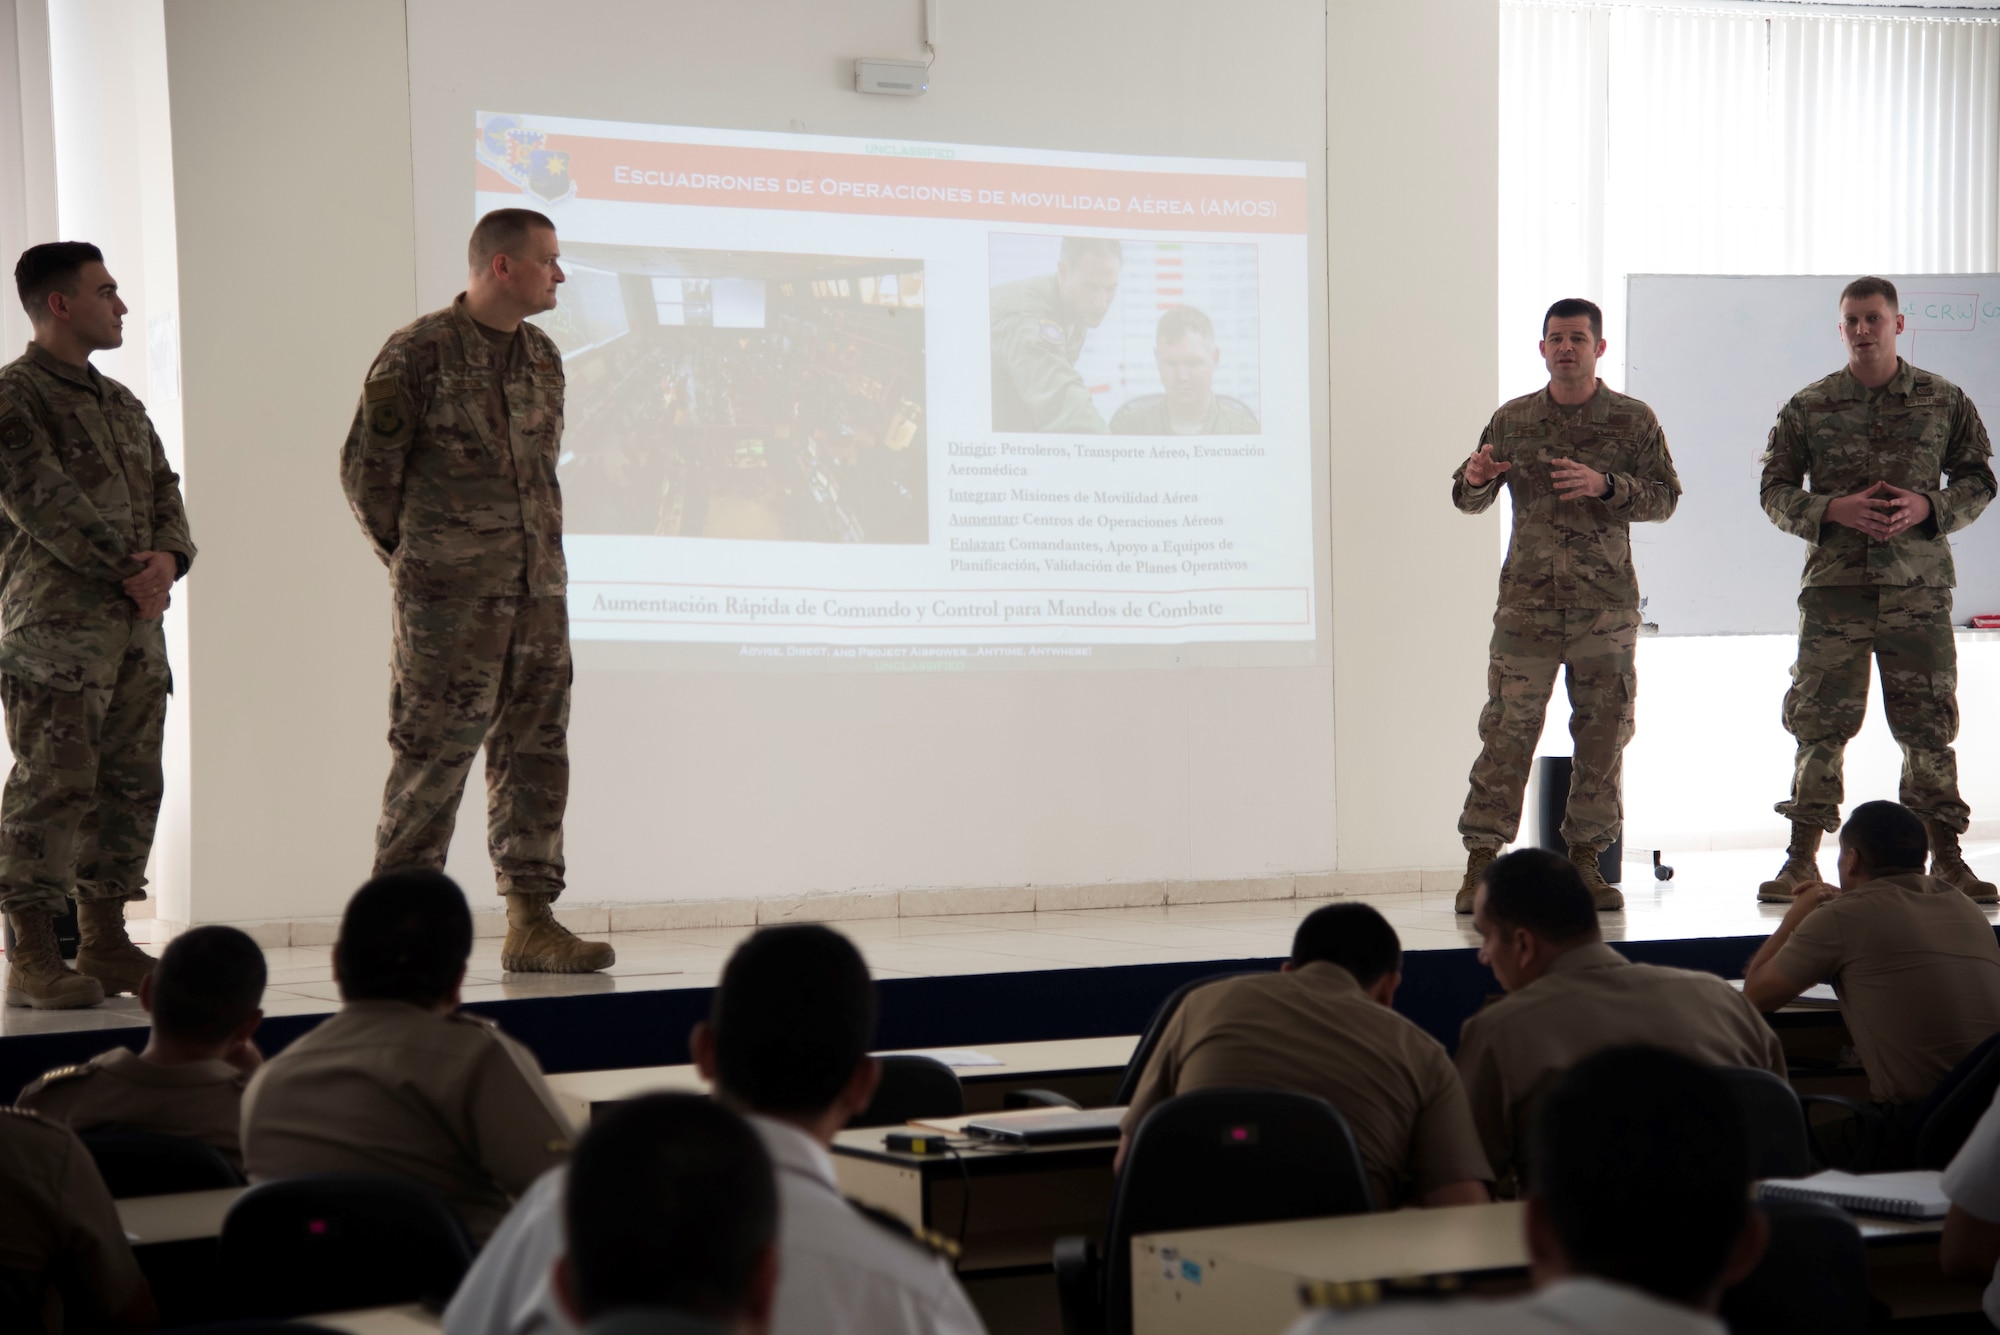 Col. Doug Jackson (left), 621st Contingency Response Wing commander, and Chief Master Sgt. Tony Jenkins 621st CRW command chief, deliver a presentation at the Joint School of the Armed Forces, Lima, Peru, March 3, 2020. The CRW leadership team was in Peru to observe aerial logistics training conducted by the 571st Mobility Support Advisory Squadron.